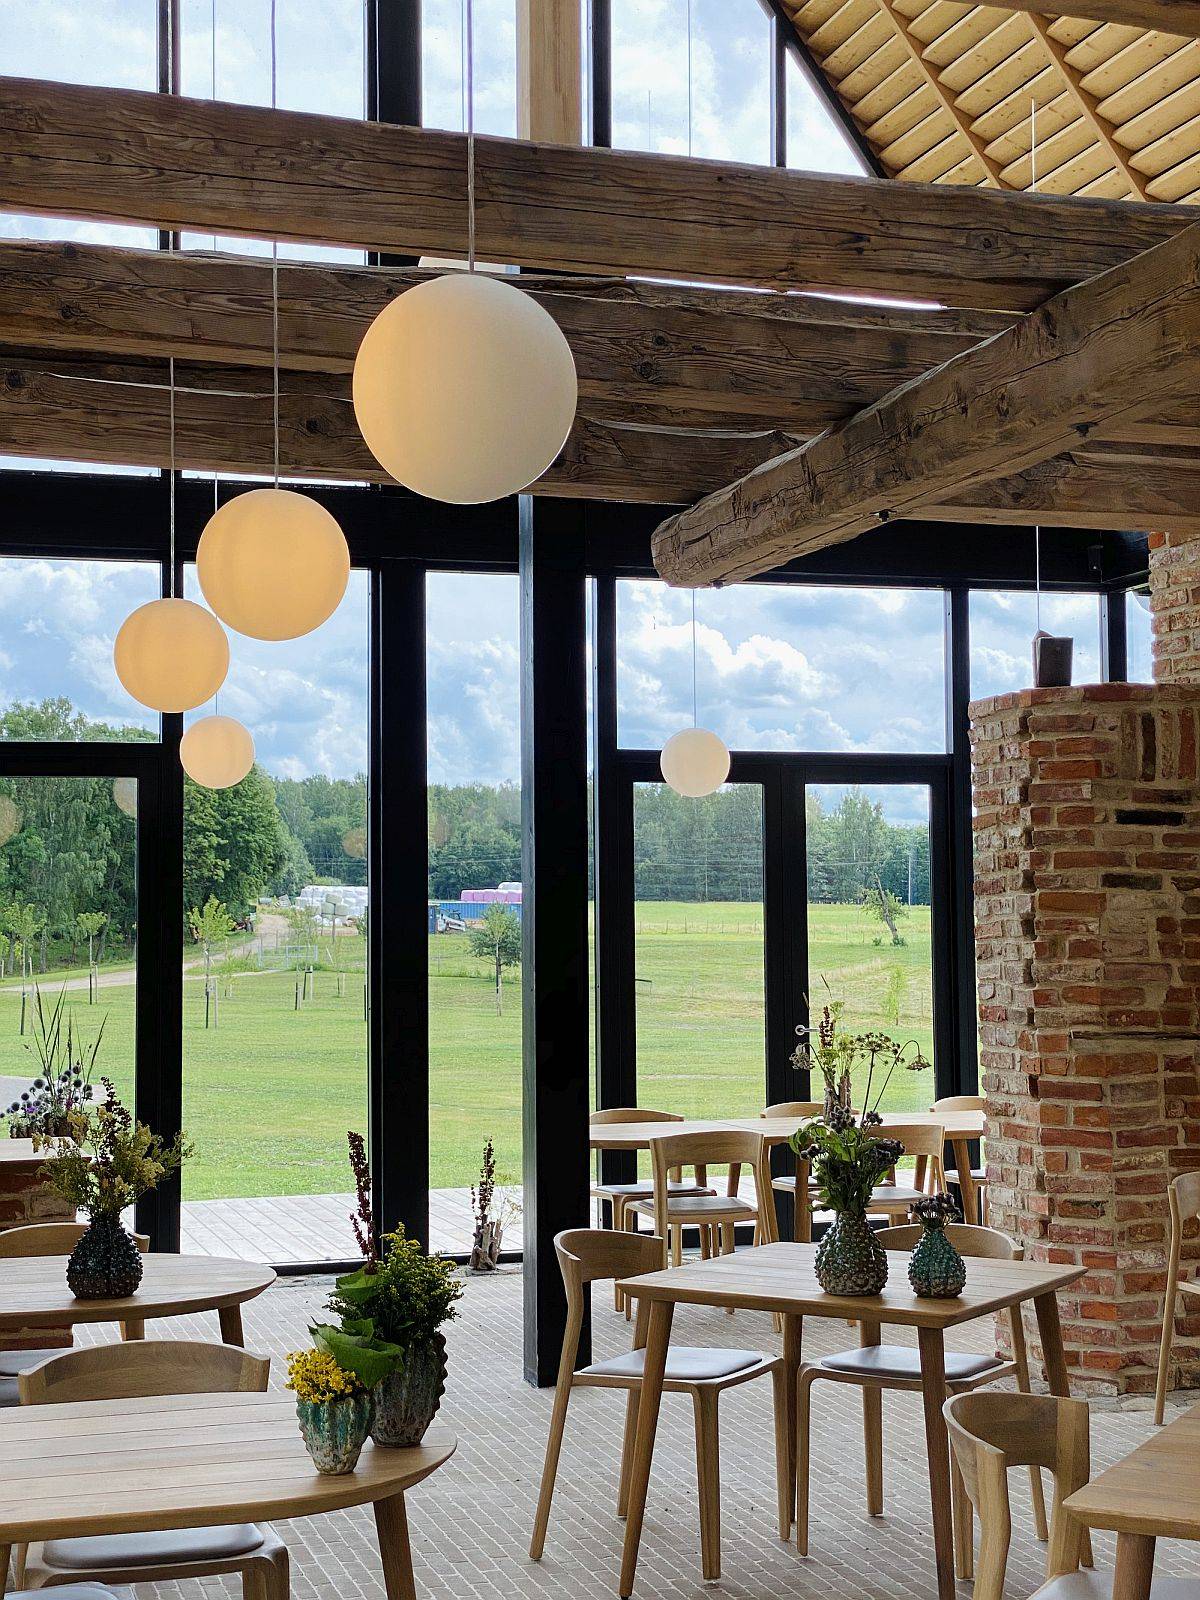 Gorgeous industrial interiors of the building offer wonderful views of the rustic landscape